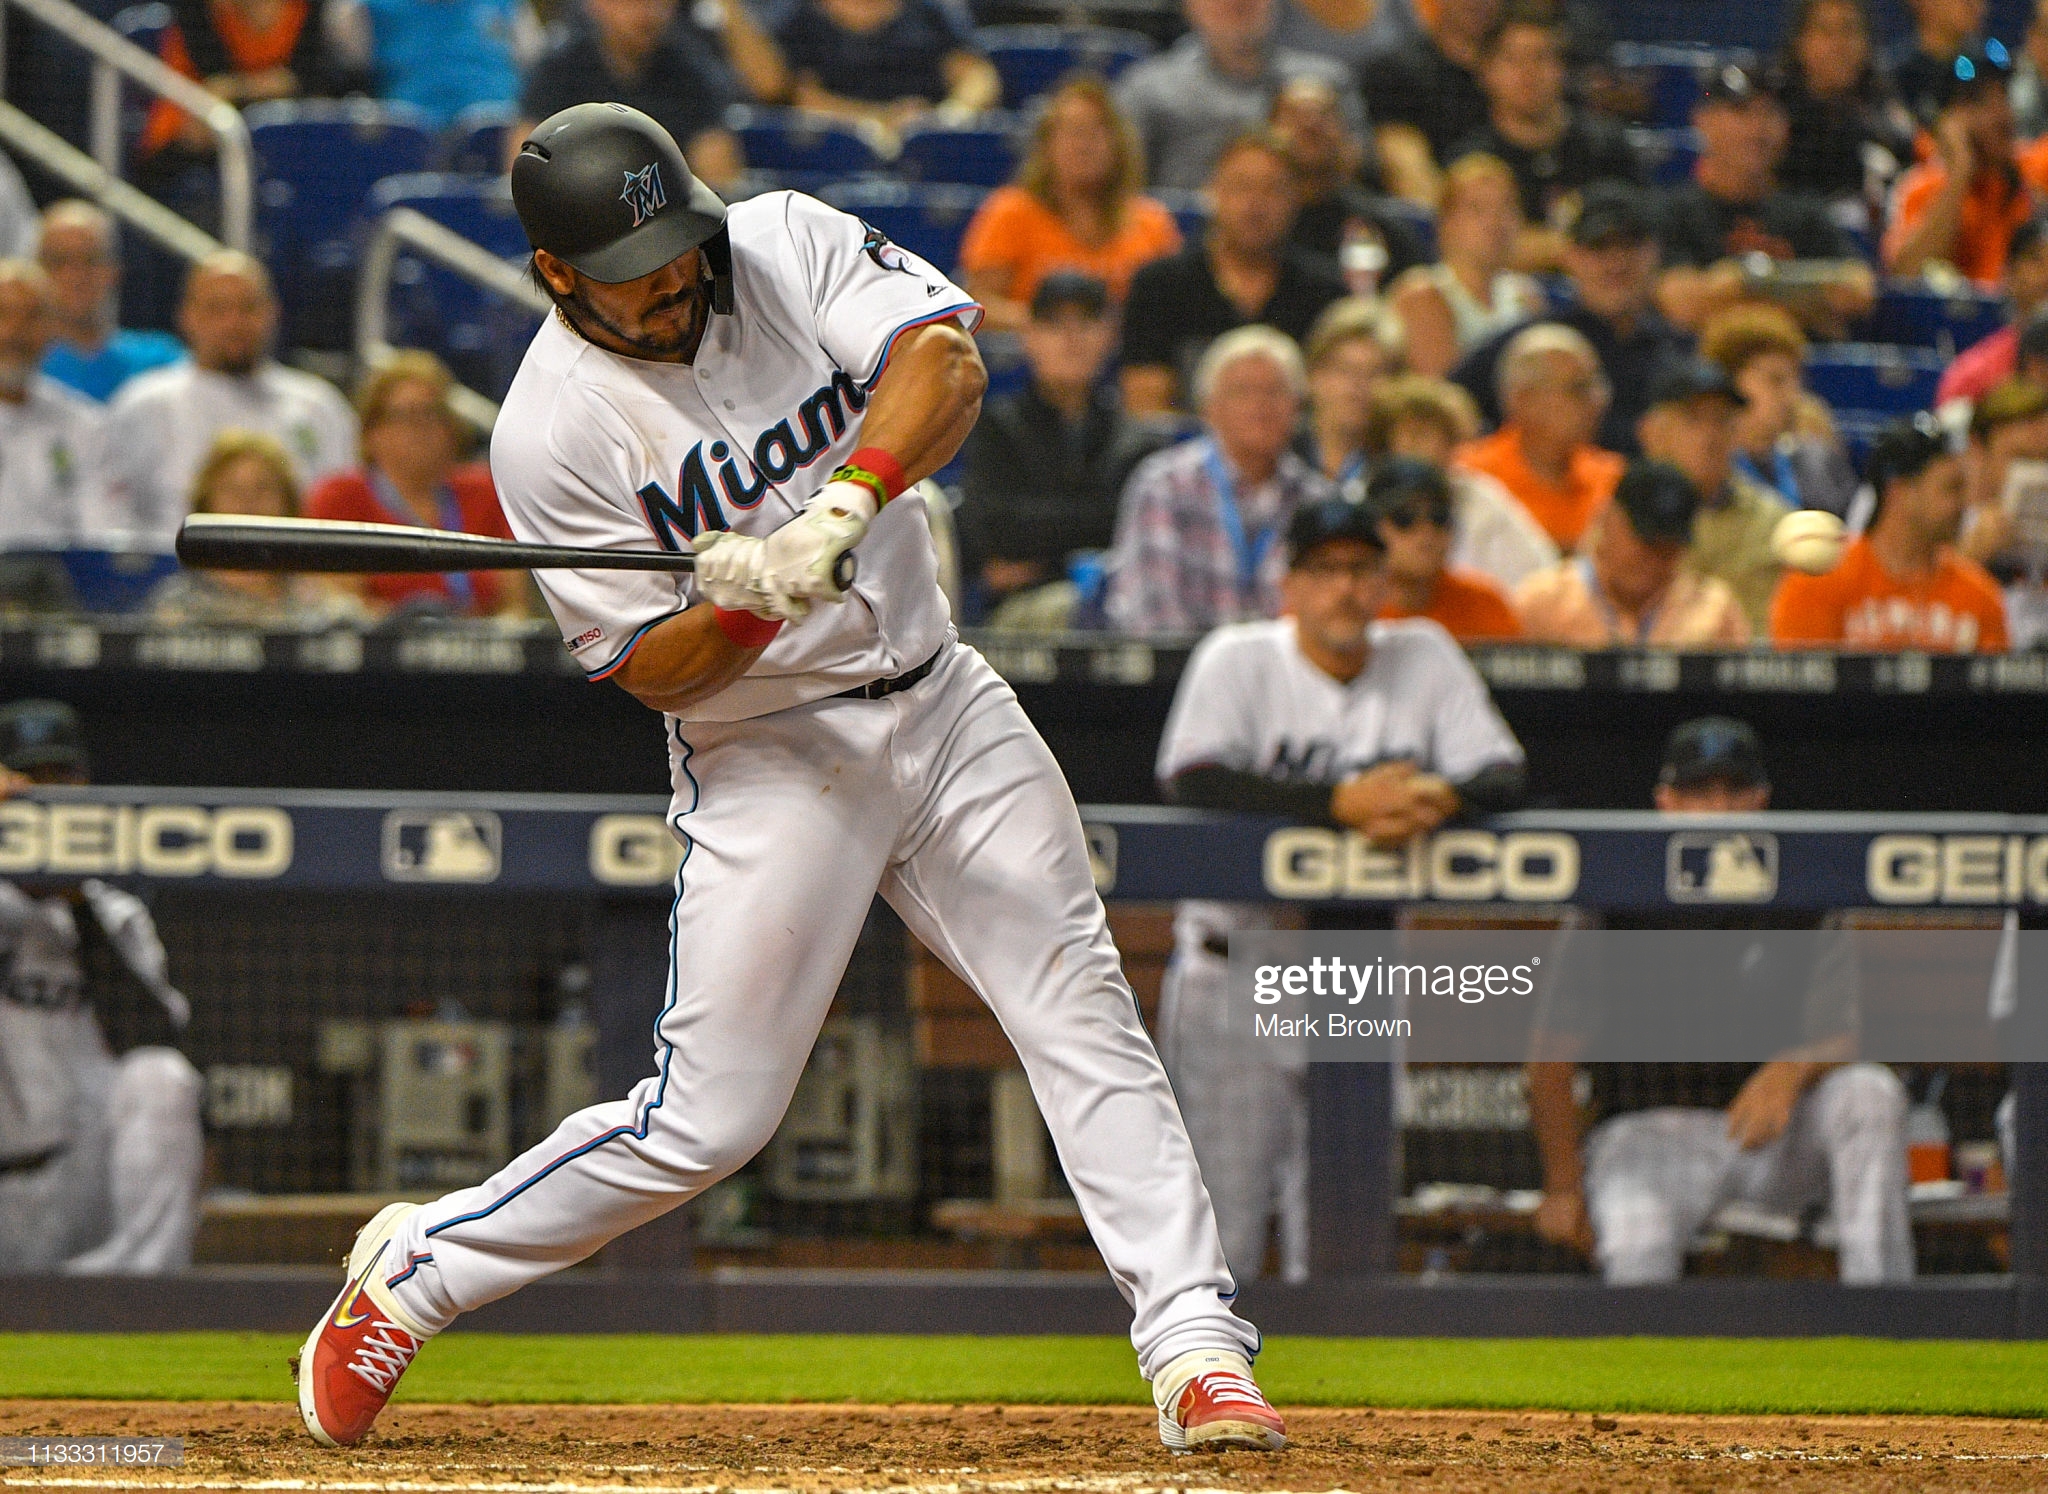 MIAMI, FL - MARCH 28: Jorge Alfaro #38 of the Miami Marlins at bat in the fifth inning against the Colorado Rockies during Opening Day at Marlins Park on March 28, 2019 in Miami, Florida. (Photo by Mark Brown/Getty Images)